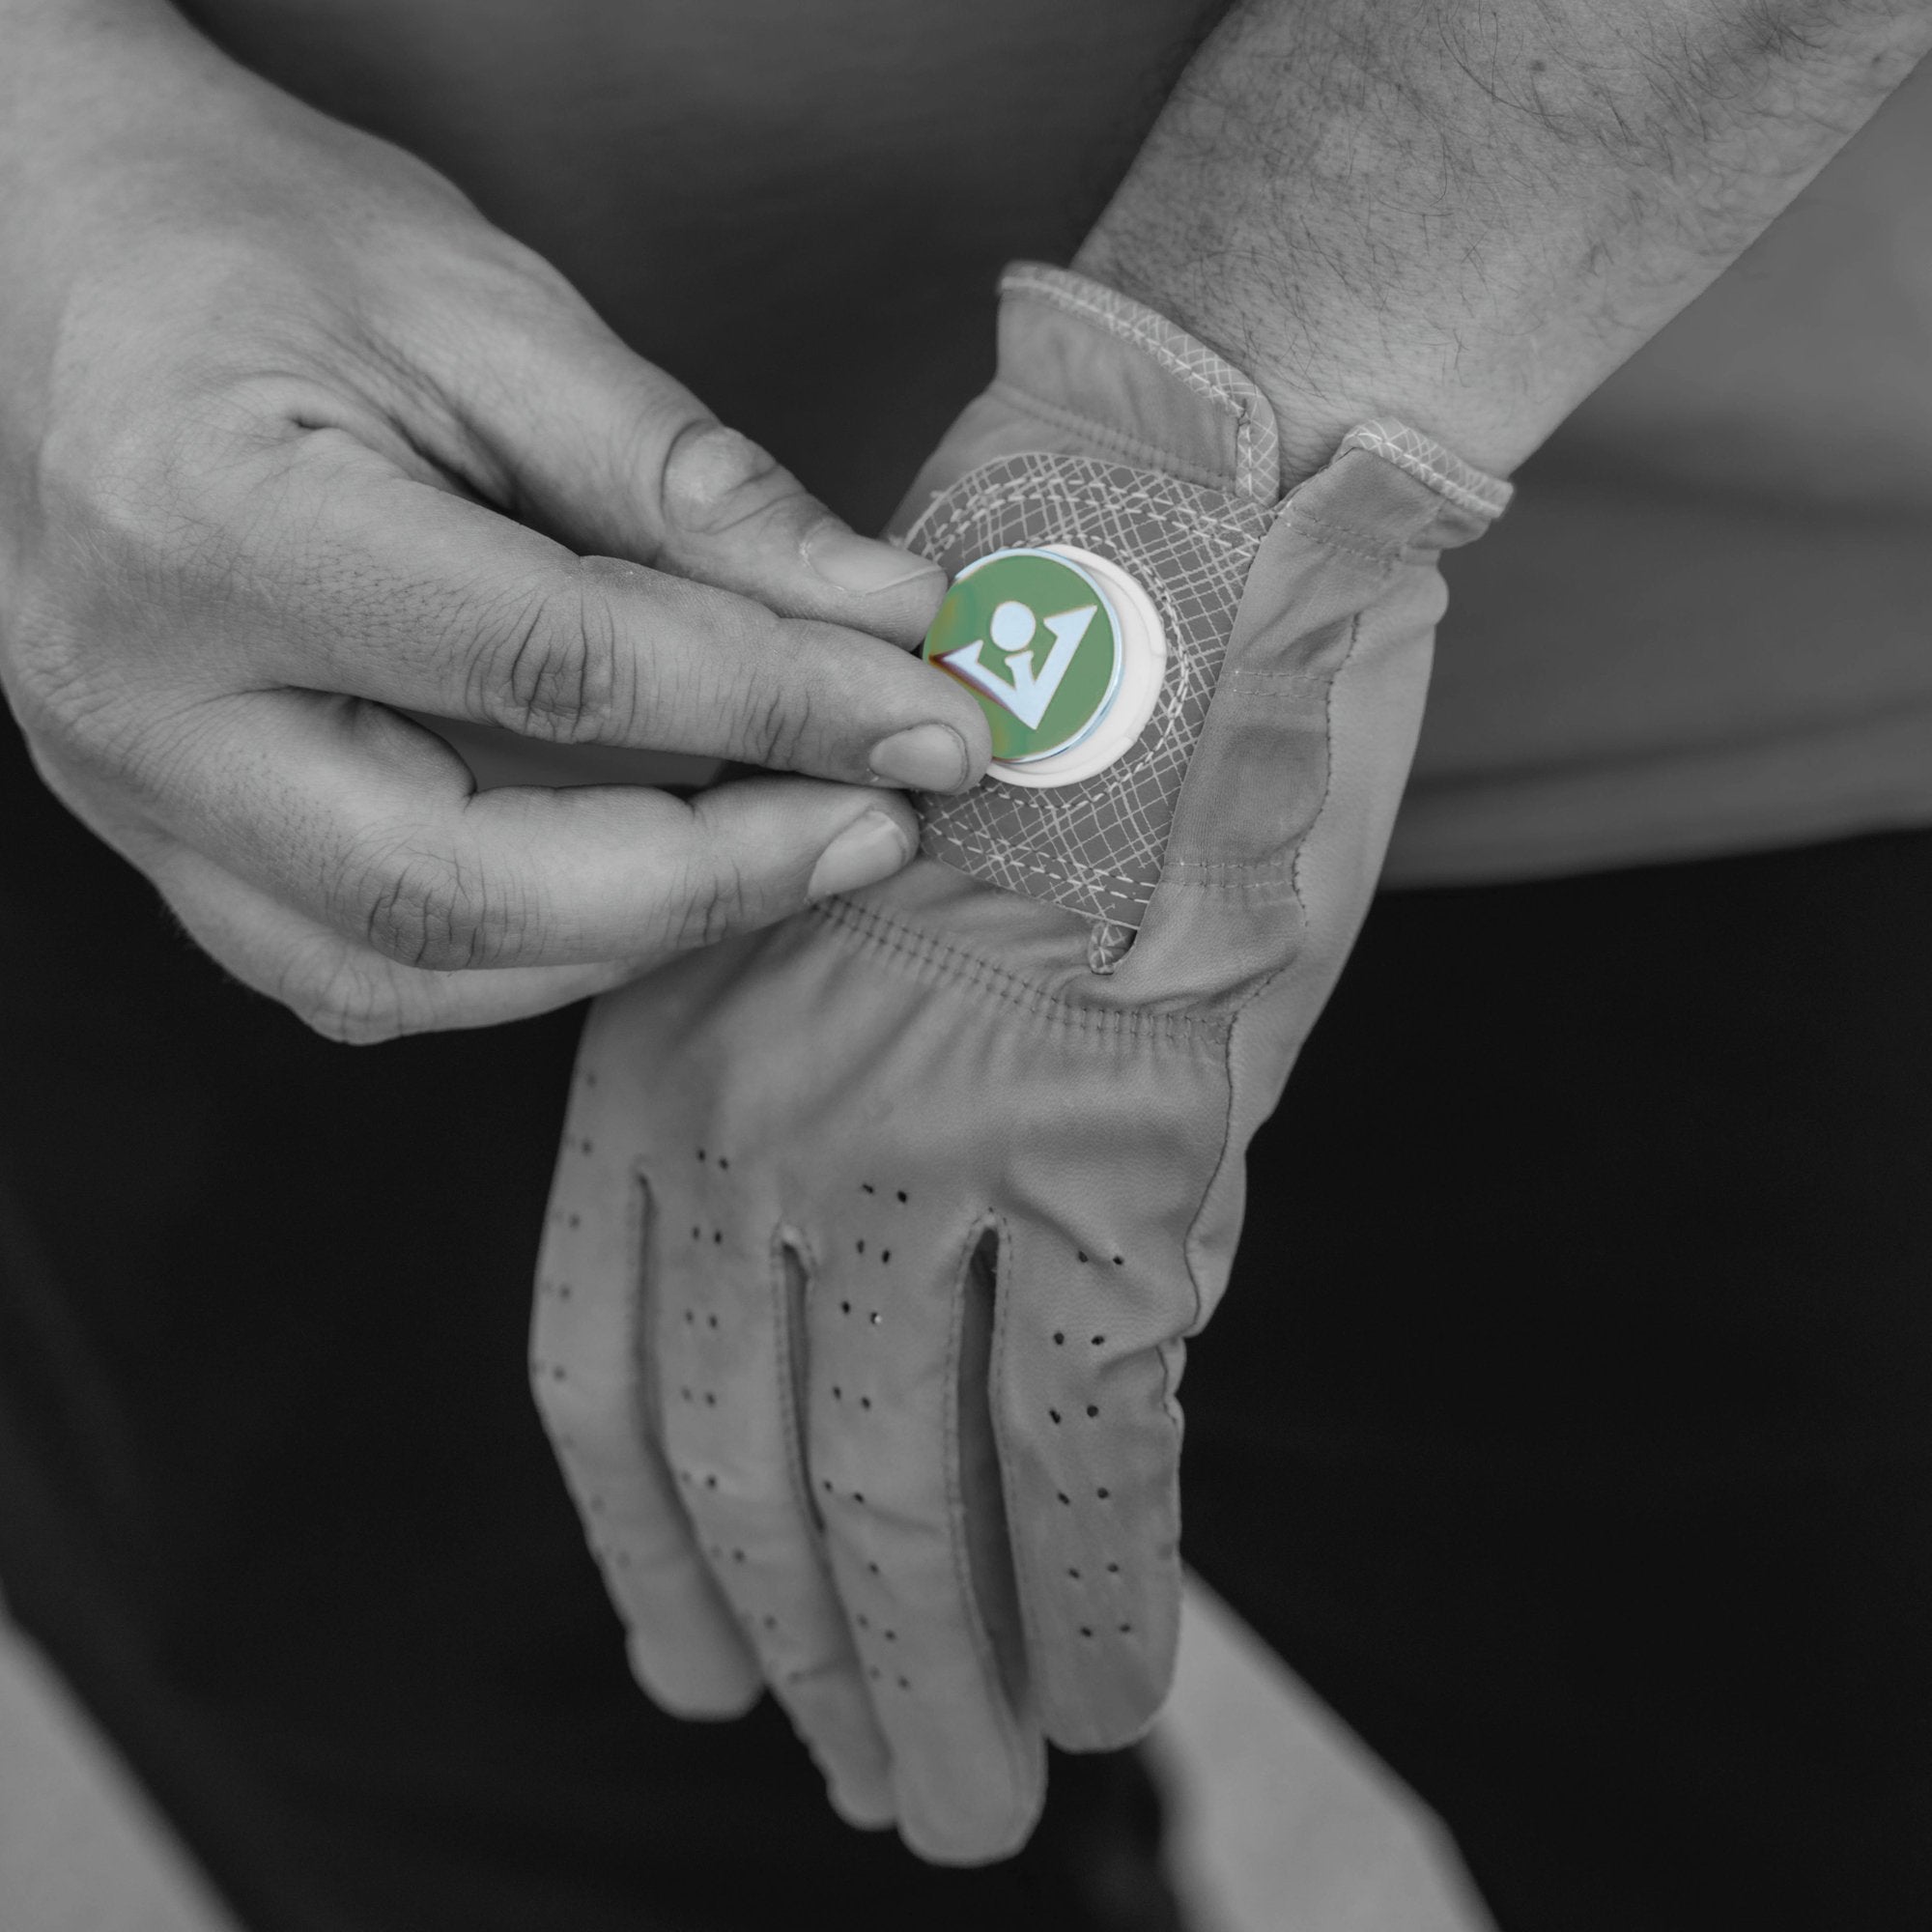 Man switching out his magnetic ball marker on his golf glove, with the magnetic ball marker in green and a VivanTee logo and the rest of the image in black and white.